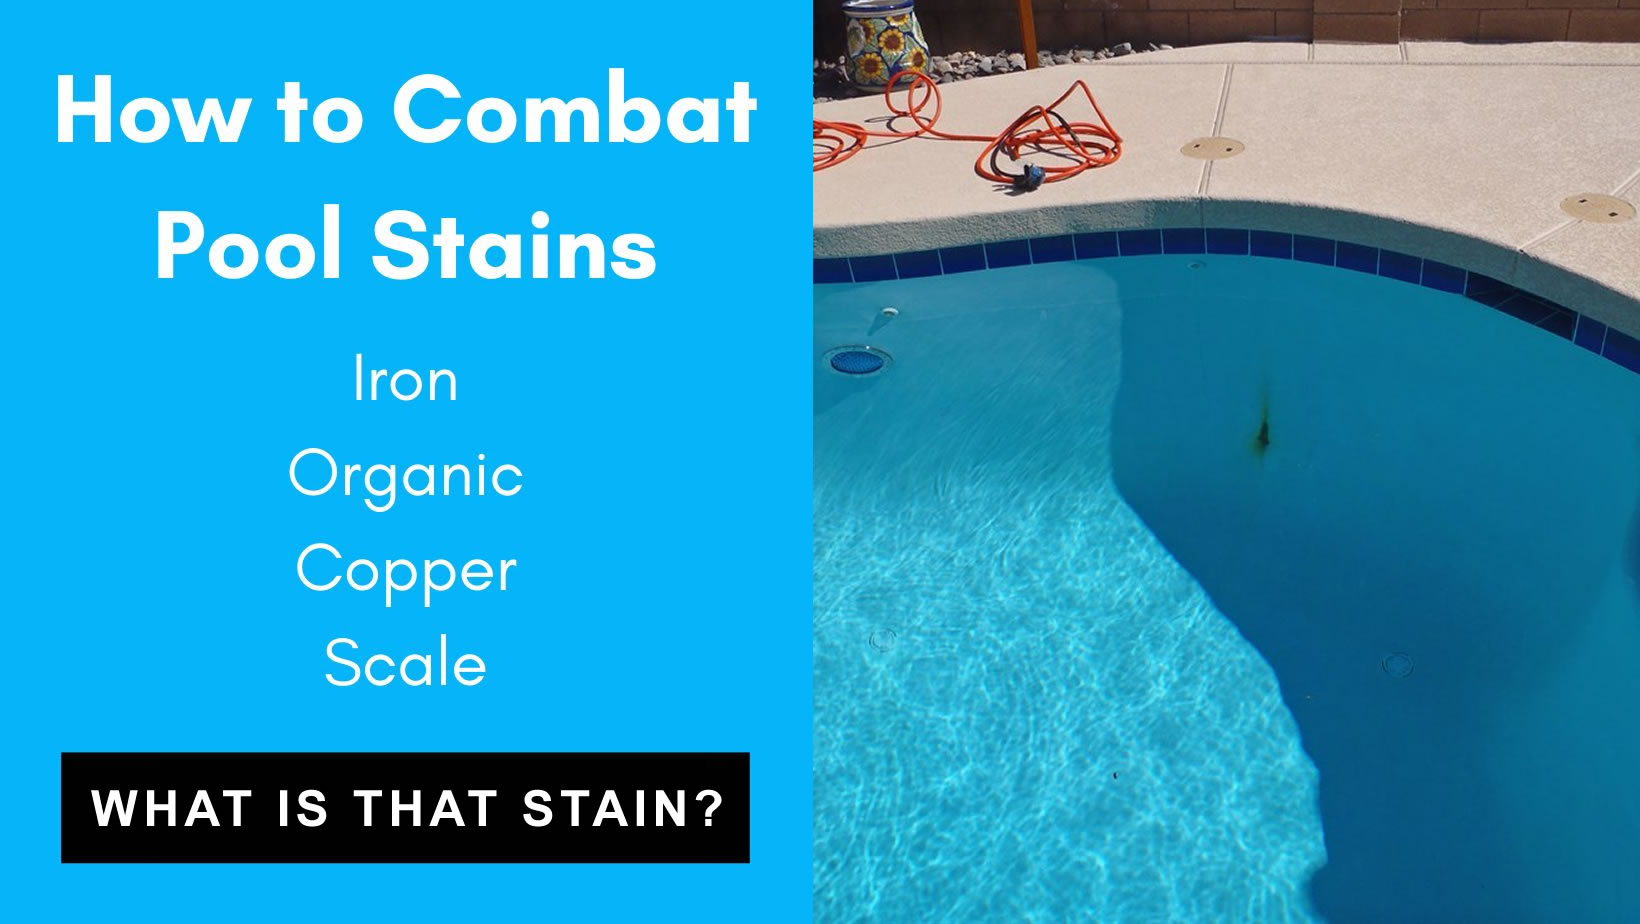 What is that pool stain?